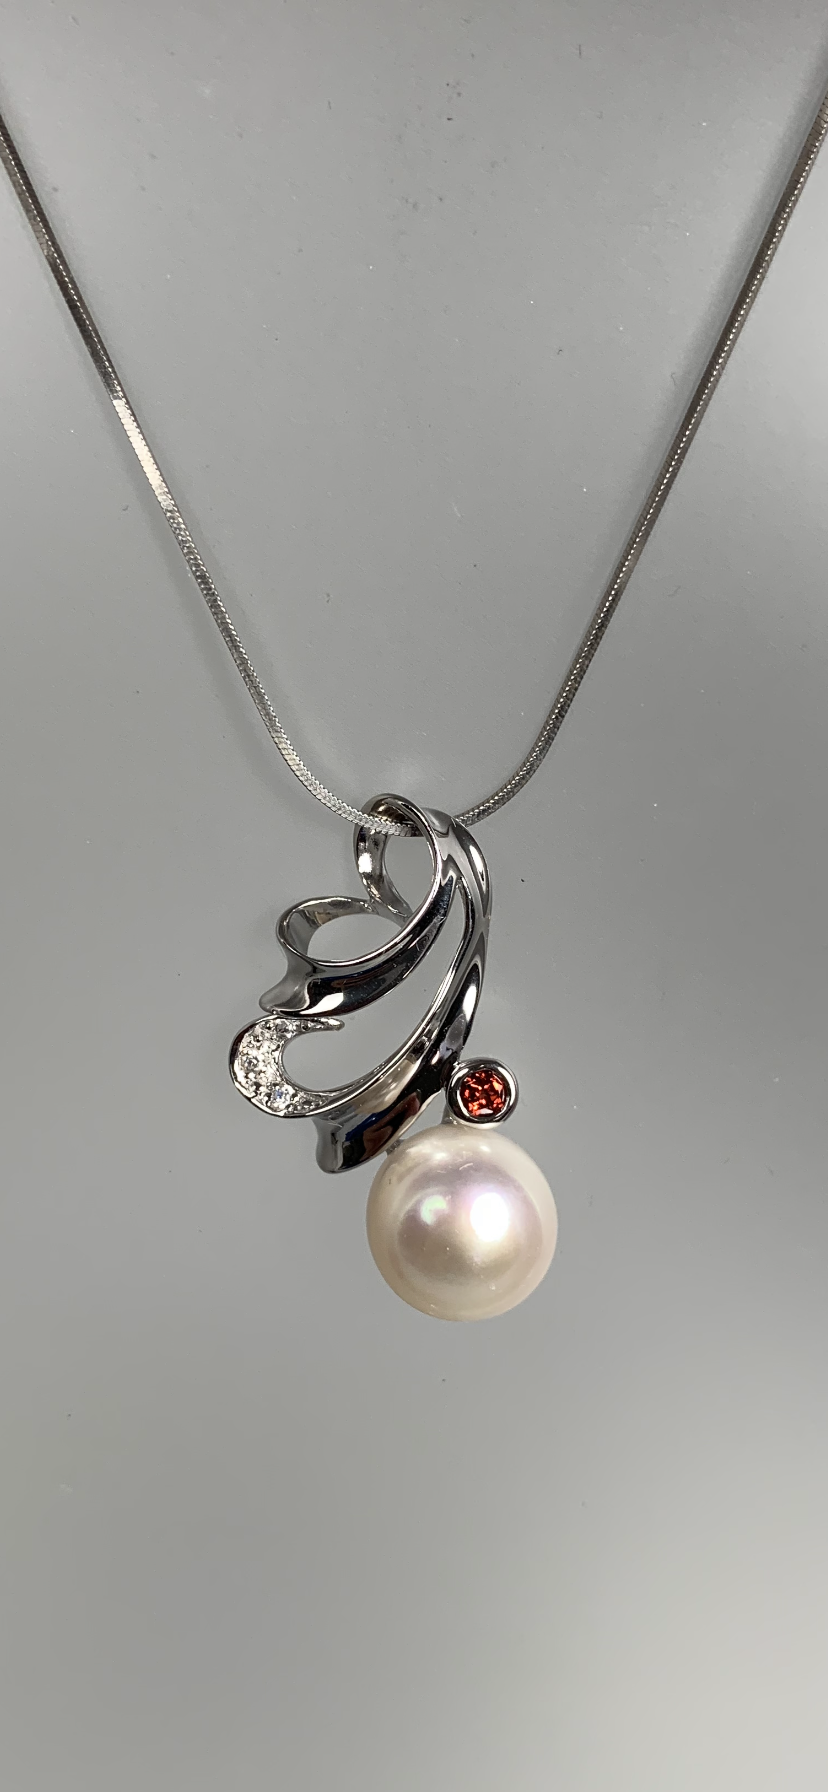 12mm Round Pearl with Garnet accent Pendant in Sterling Silver